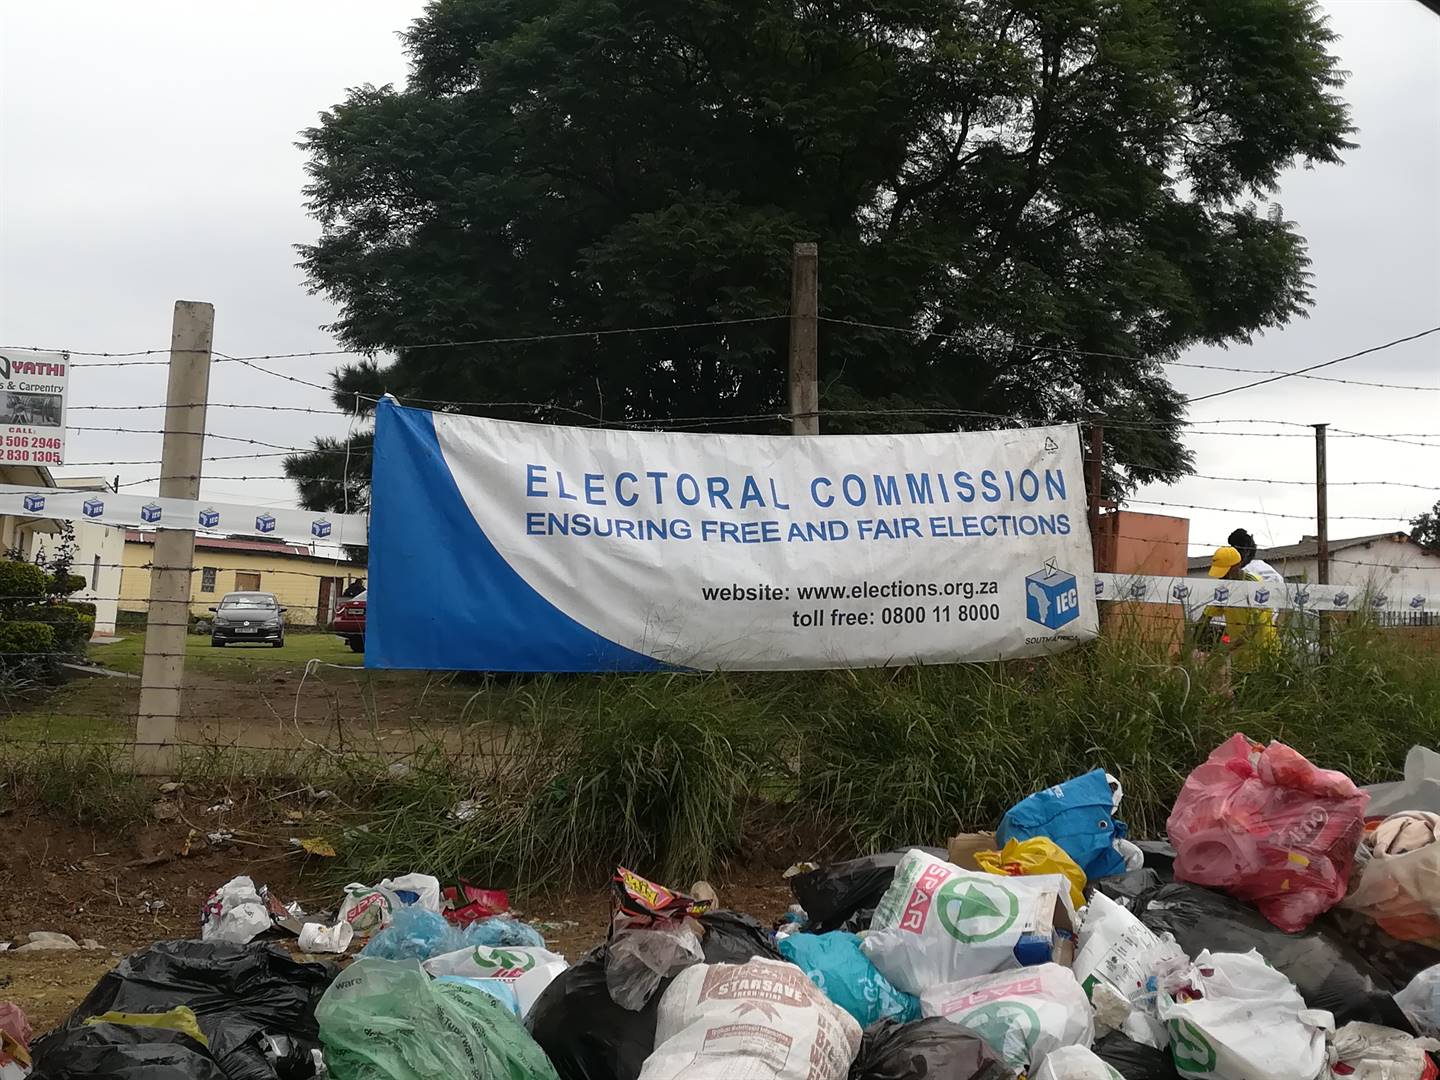 A voting station in Ngangelizwe, Mthatha, where refuse lies uncollected for weeks in the King Sabata Dalindyebo municipal. Picture: Lubabalo Ngcukana/City Press